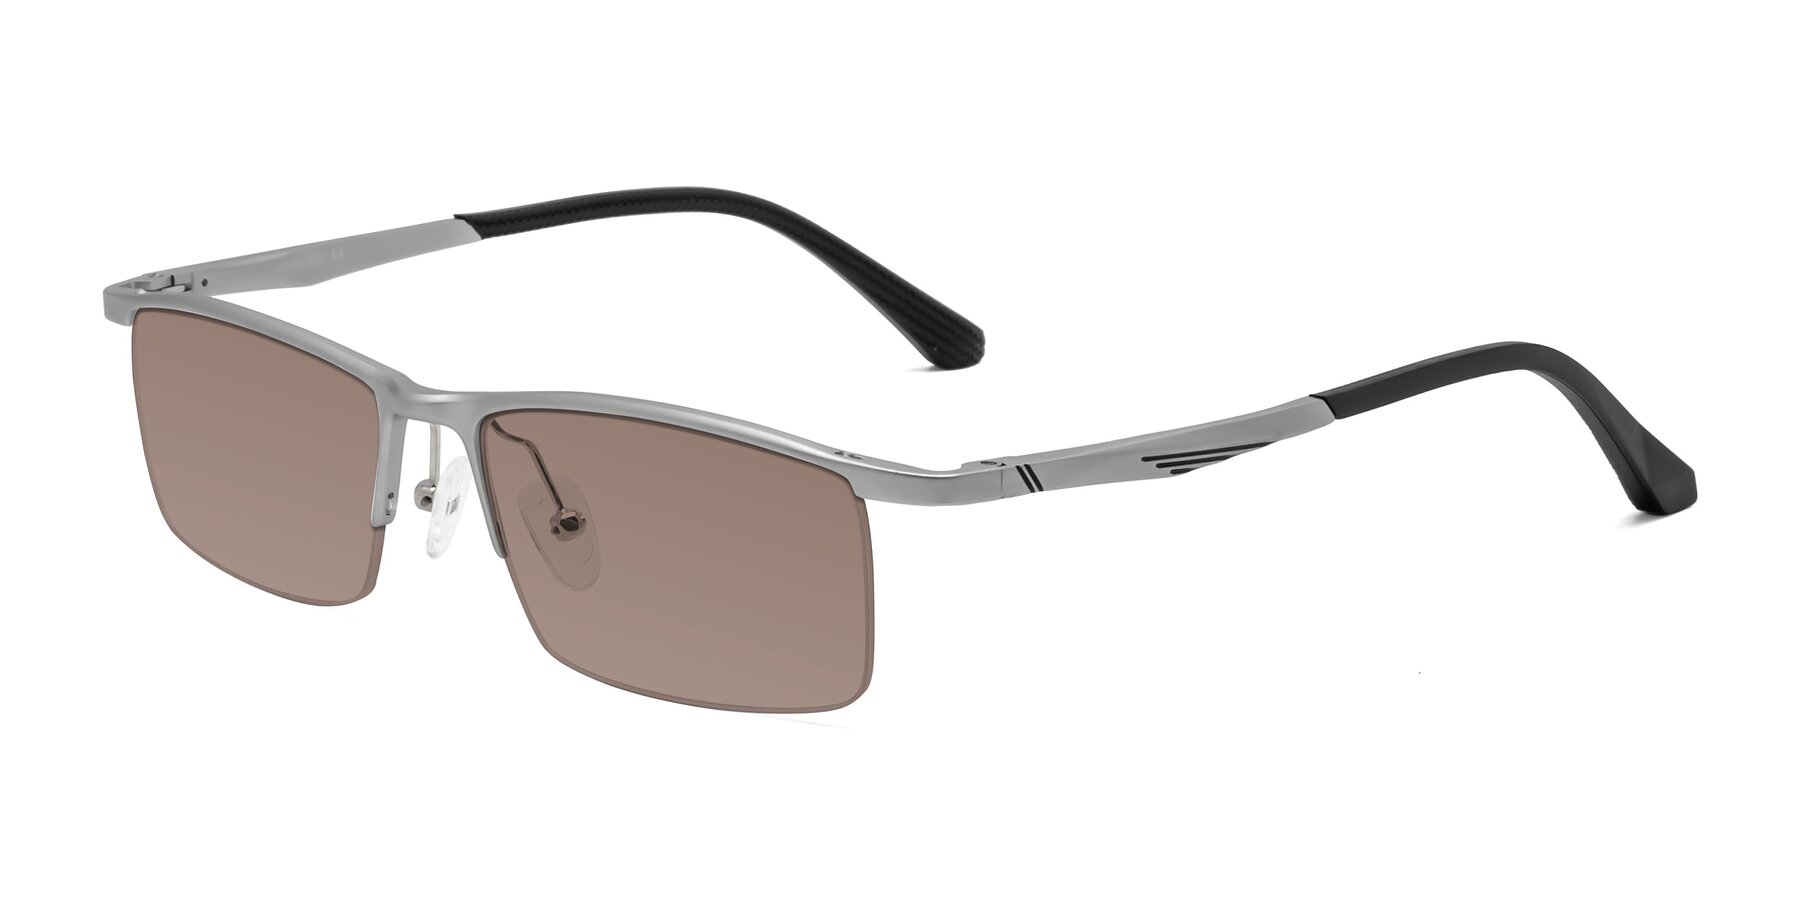 Angle of CX6236 in Silver with Medium Brown Tinted Lenses